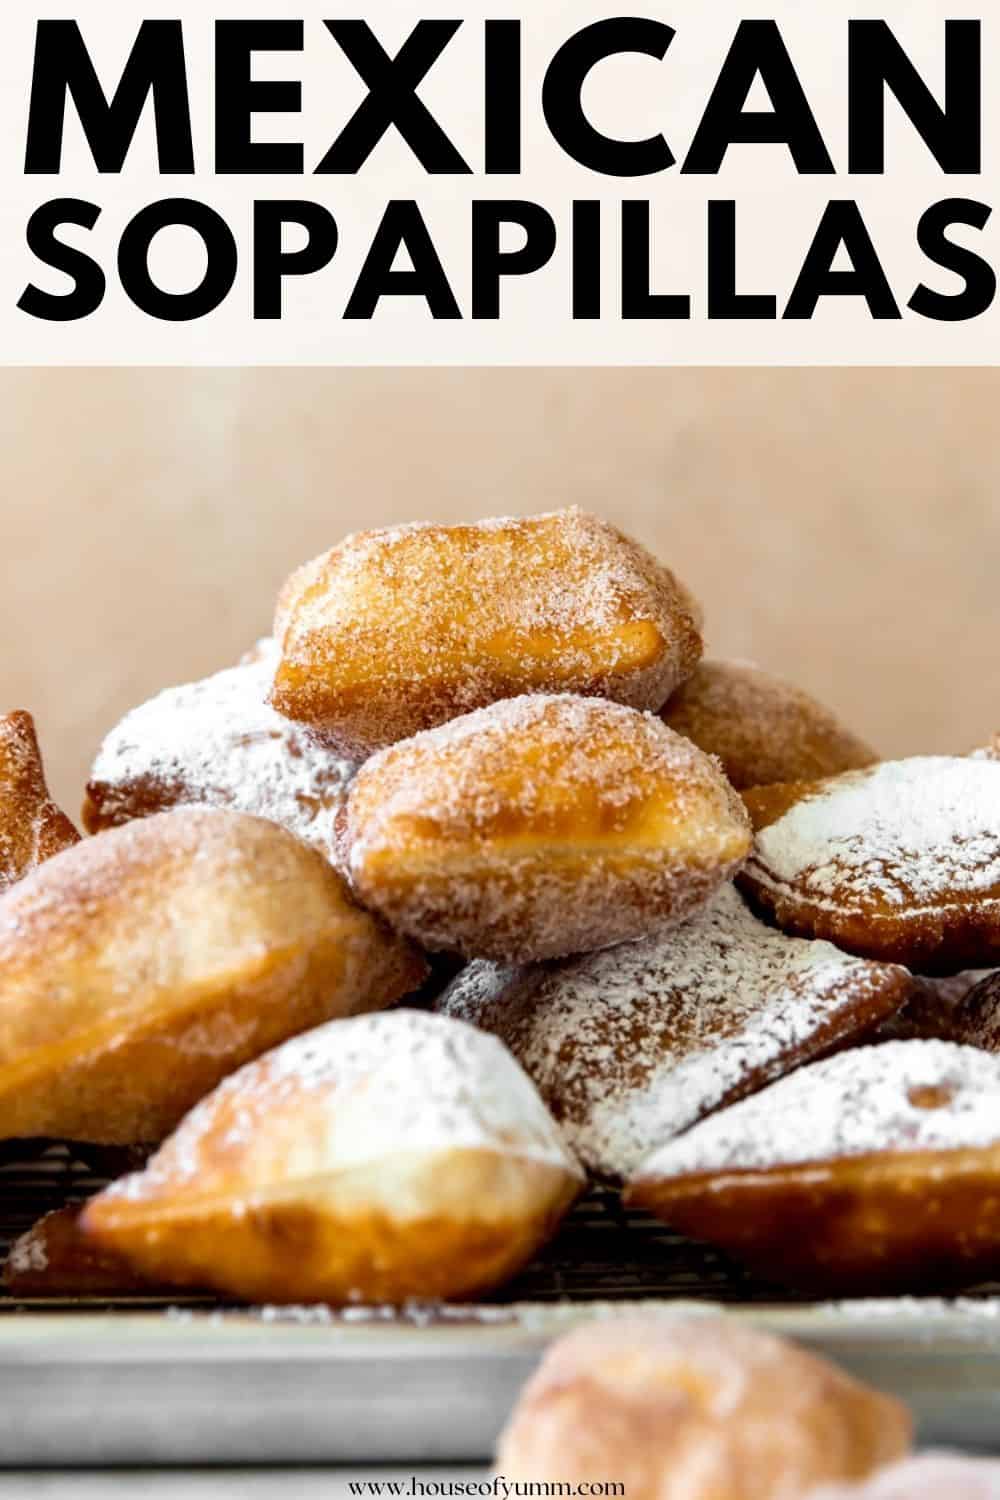 Sopapillas with text.